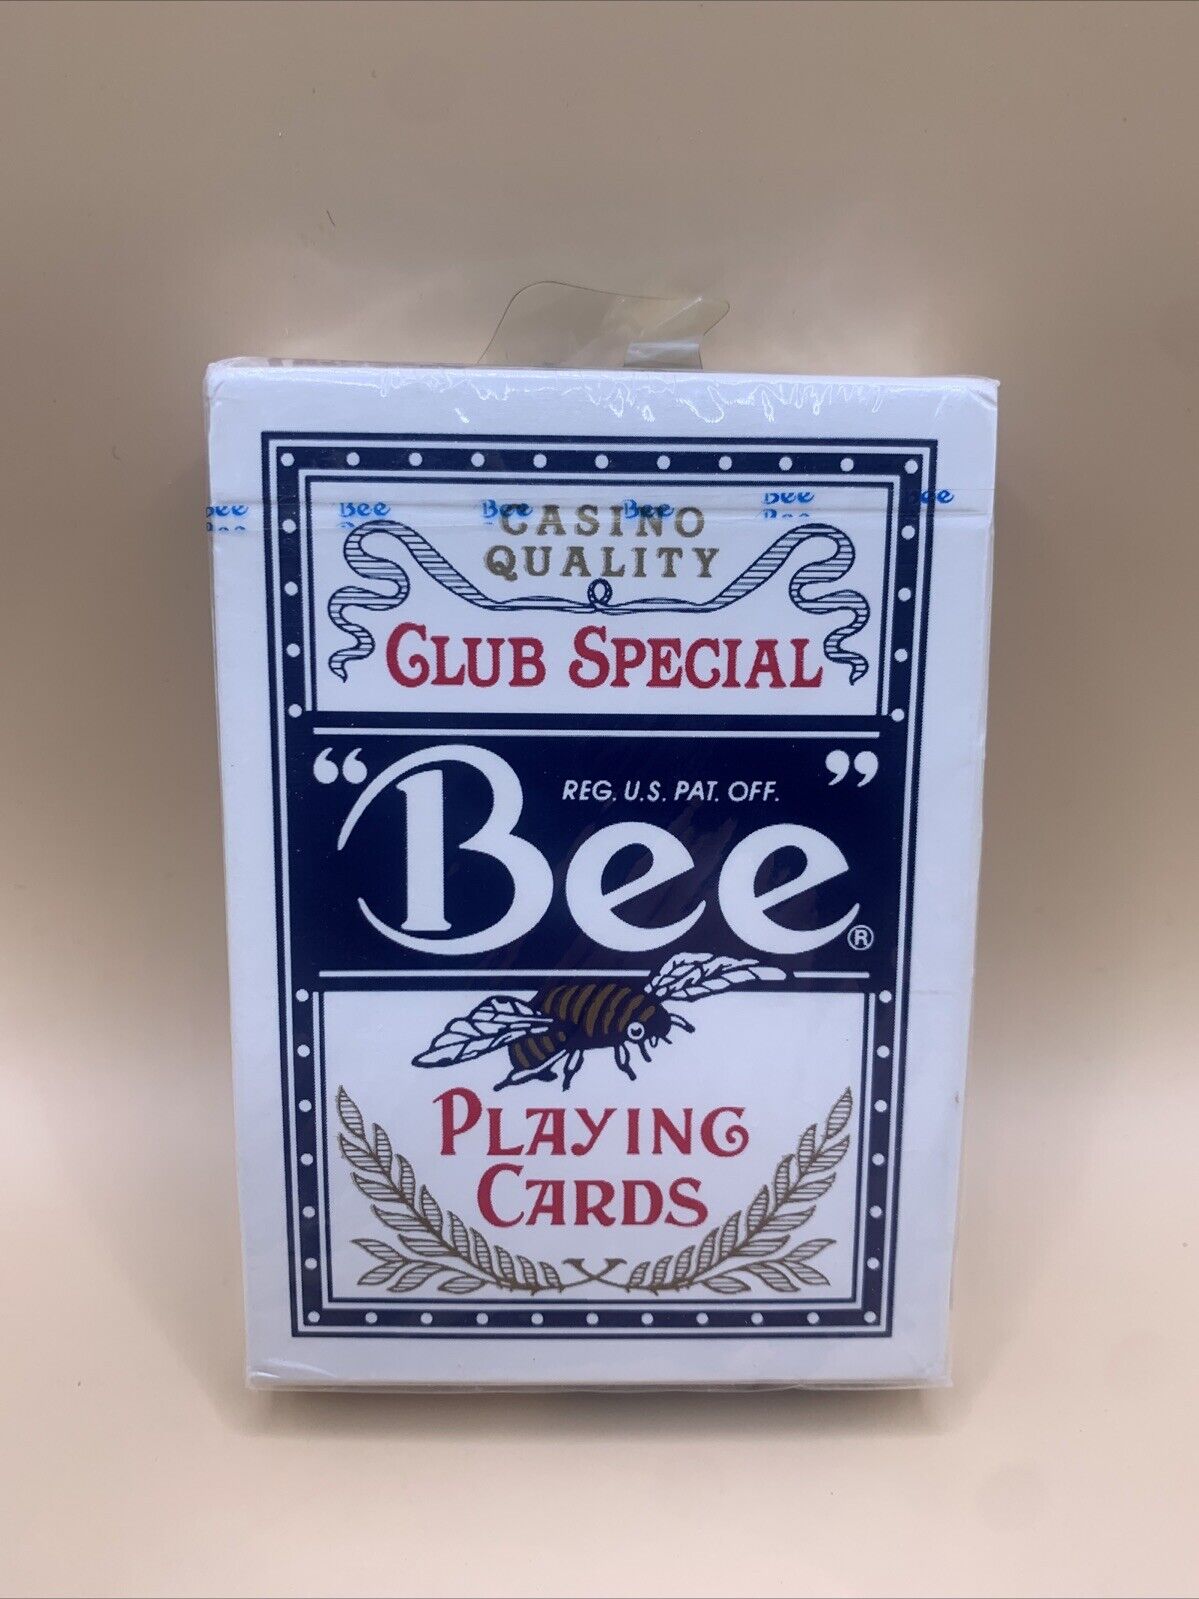 Vintage Deck of Mirage Casino Las Vegas Bee Club Special Playing Cards